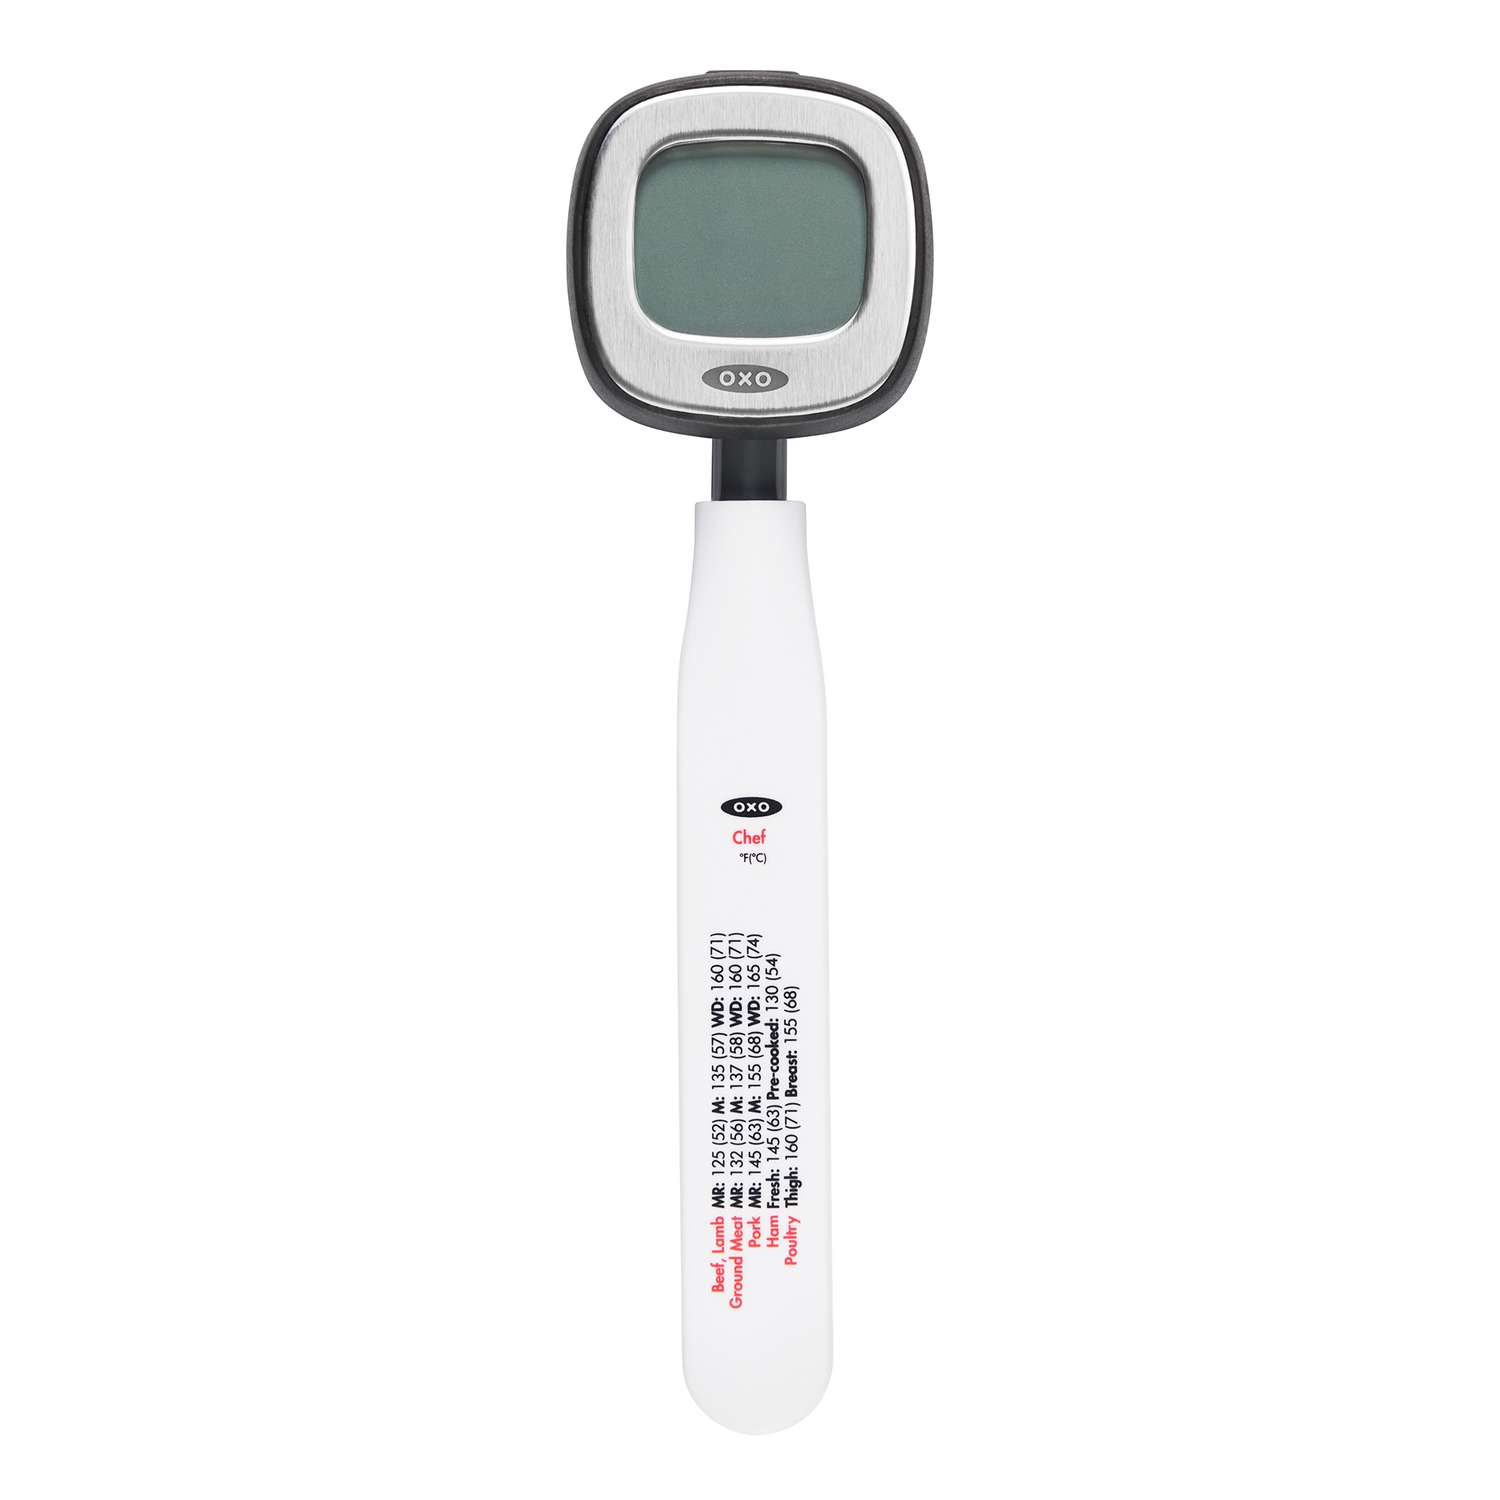 Traeger - Digital Instant Read Thermometer